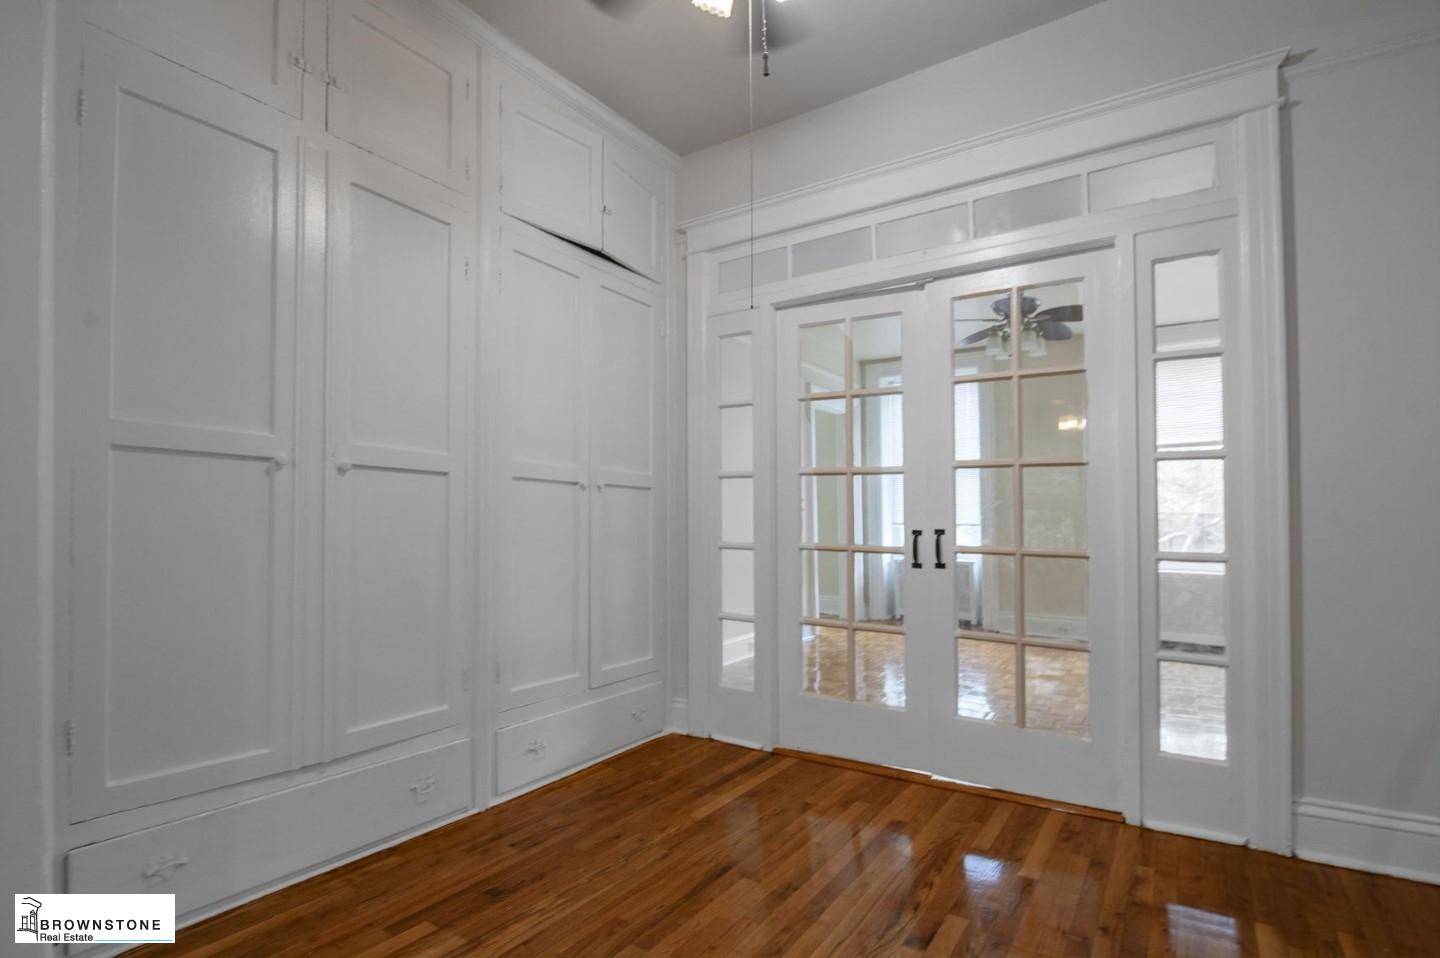 The quiet, tree lined streets of Brownstone Brooklyn give a homely and tranquil feeling to this spacious, one bedroom apartment with a windowed den.